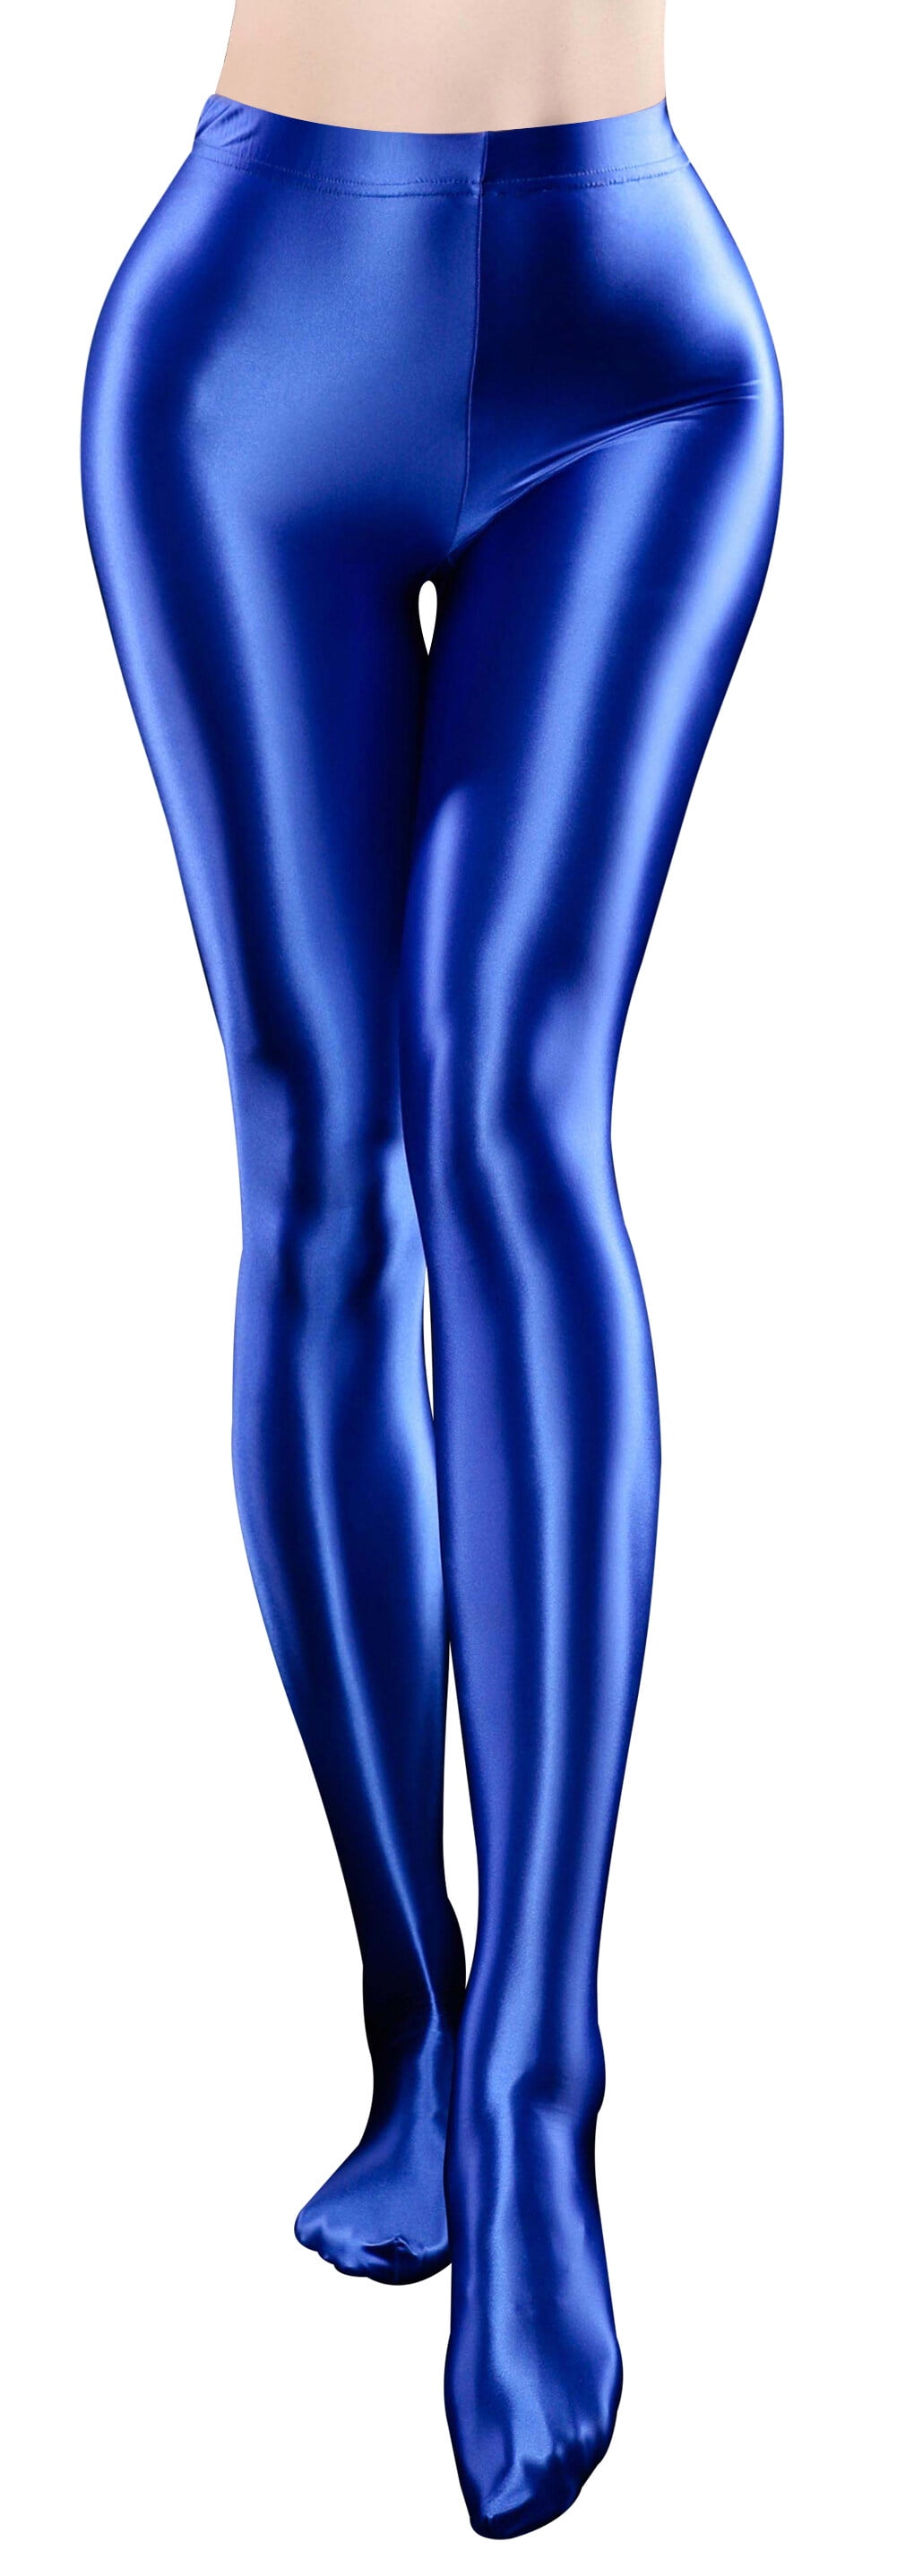 Shiny Pantyhose for Women Oil Glossy Footed Tights High Waist Pilates Dance  Stockings Leggings Stretch Workout Yoga Sports Lingerie Pants Clubwear